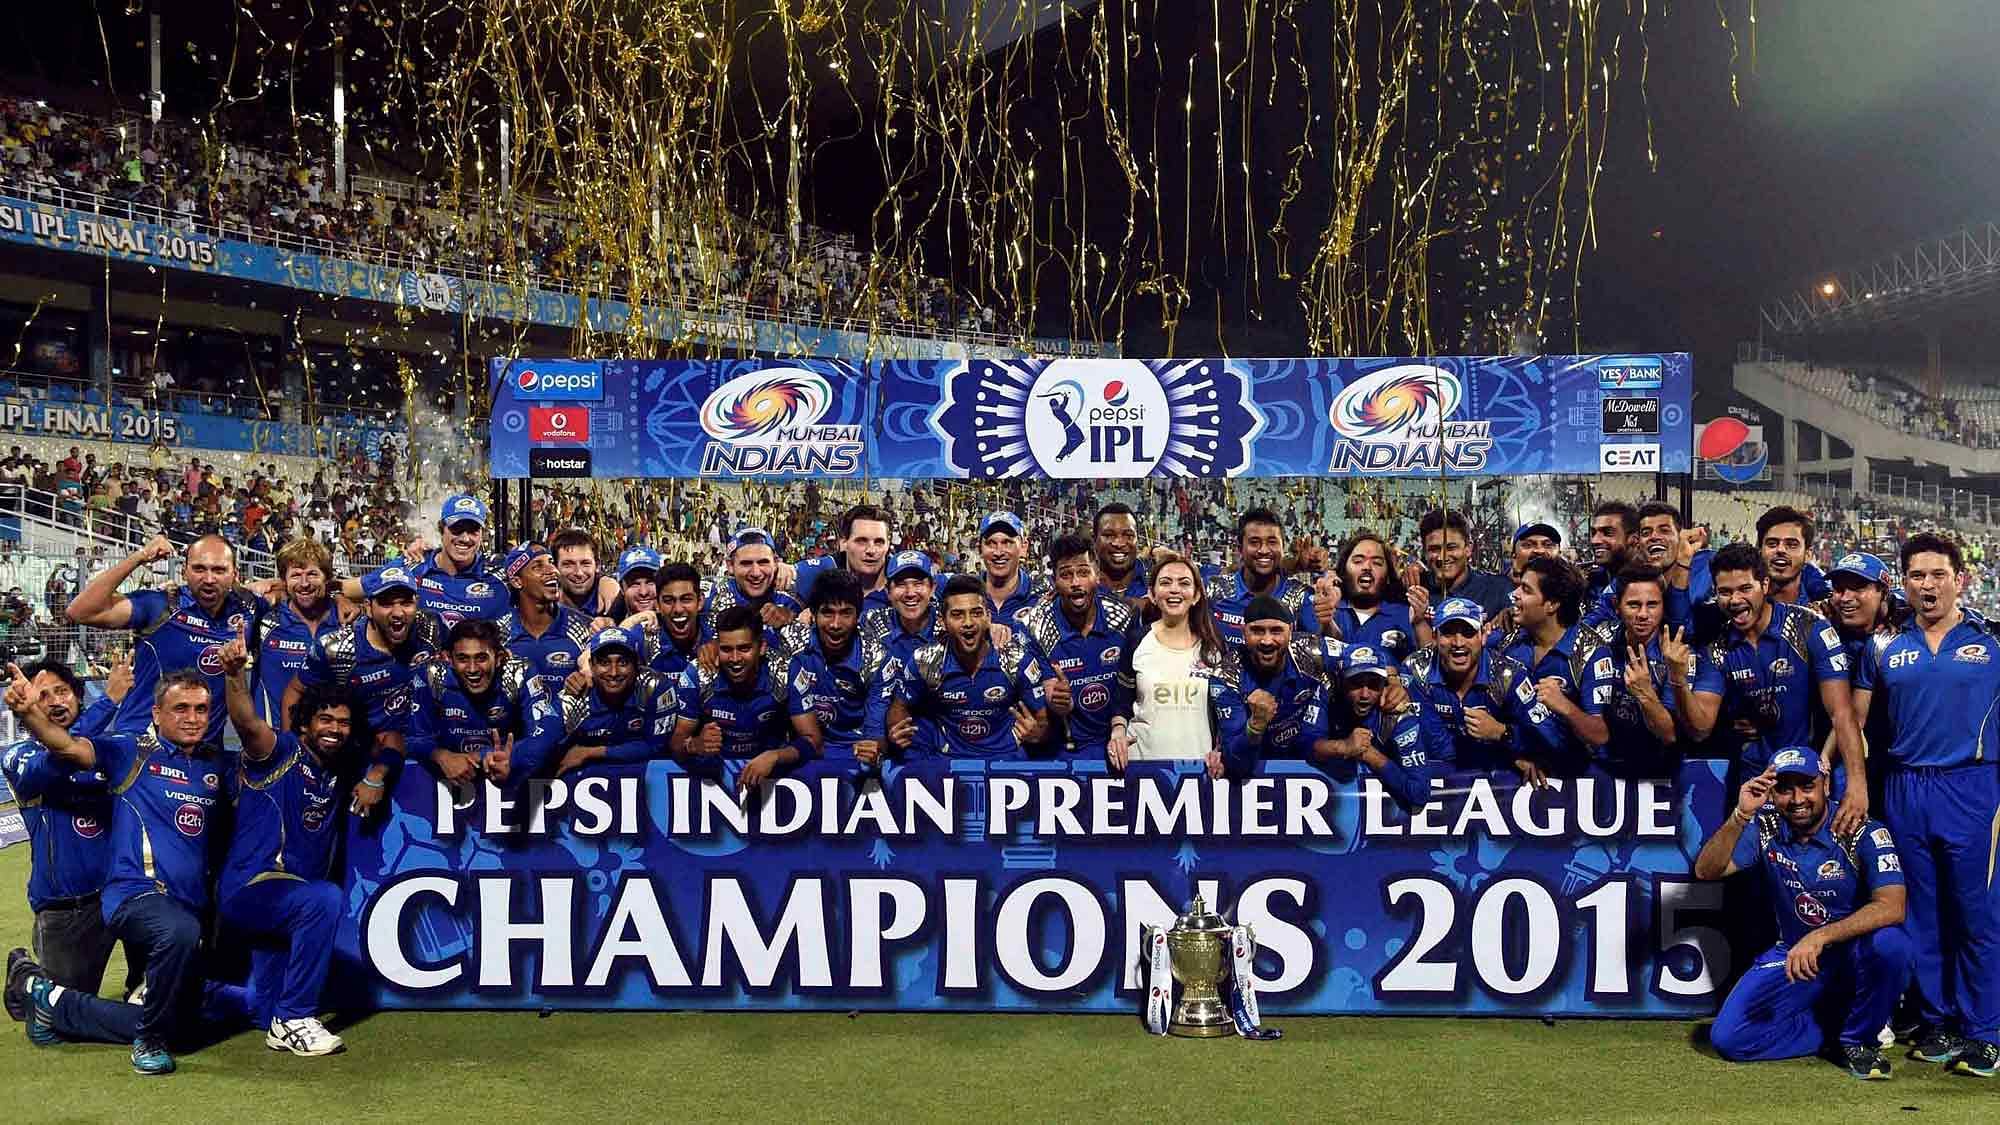 Mumbai Indians are the joint most successful franchise in IPL history, having won three titles (2013, 2015, 2017).